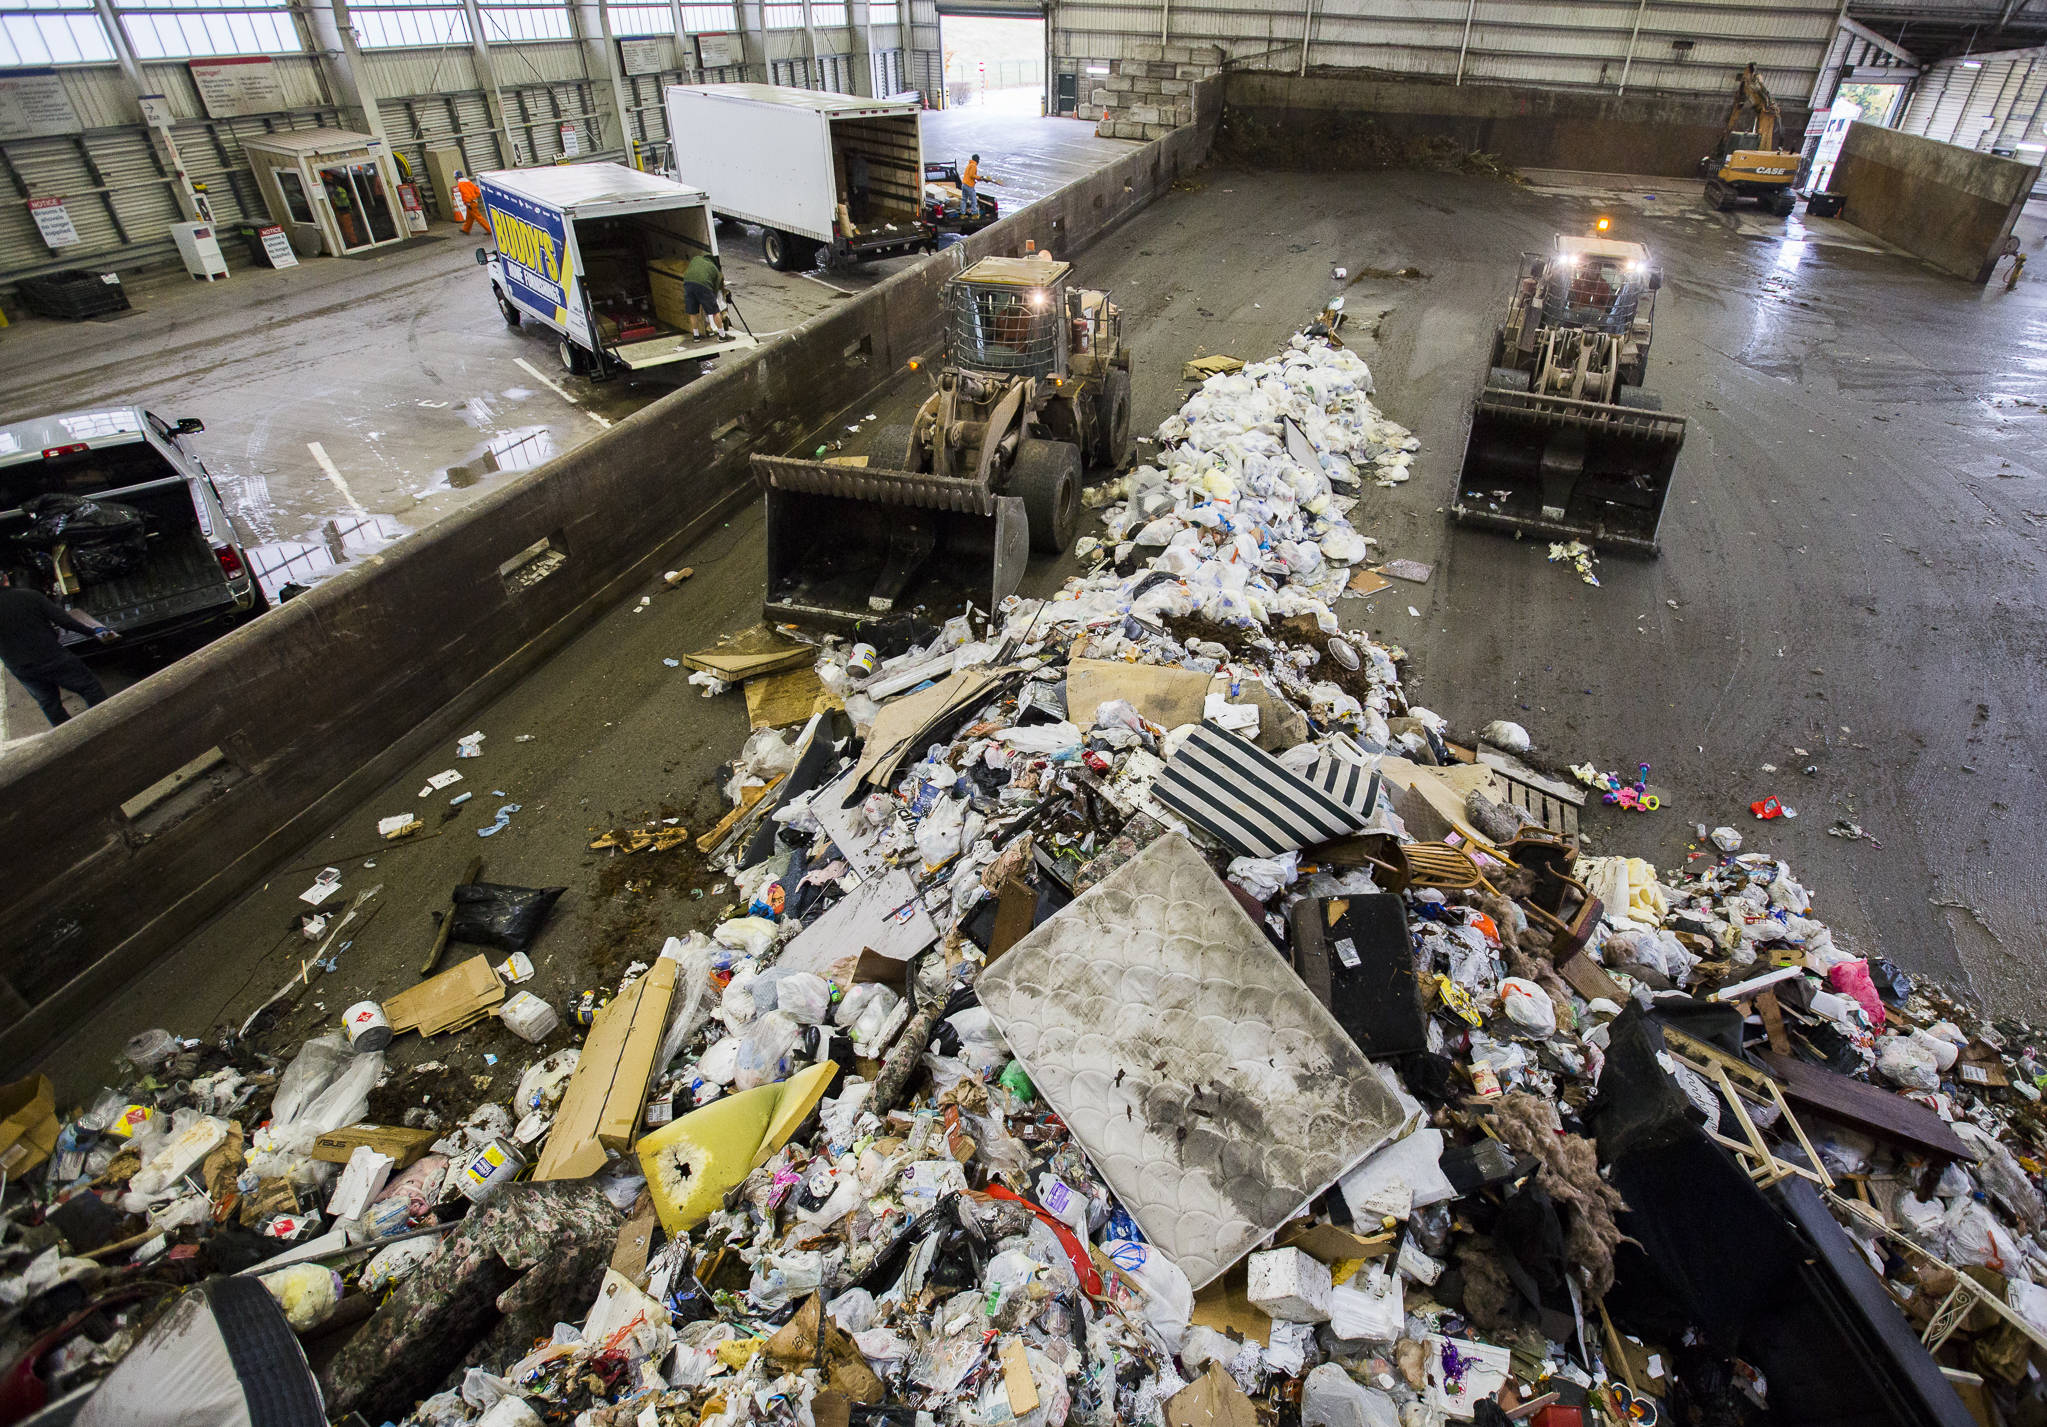 Front loaders push trash forward into one of the compactors at the Airport Road Recycling & Transfer Station on Nov. 24 in Everett. Photo by Olivia Vanni/The Herald (Everett)